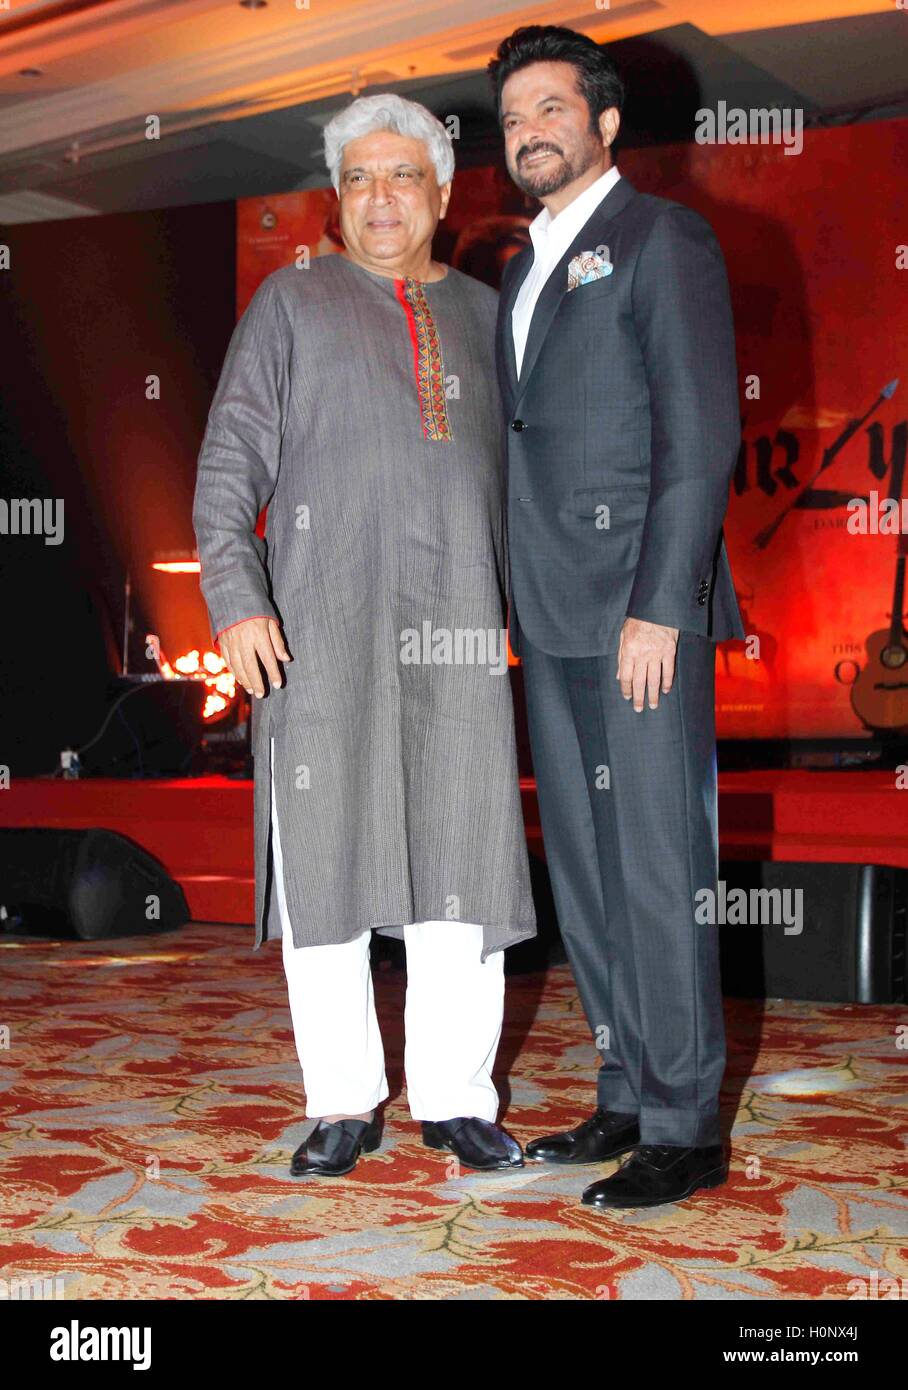 Bollywood lyricist Javed Akhtar with actor Anil Kapoor during the music launch of film Mirzya in Mumbai, India Stock Photo